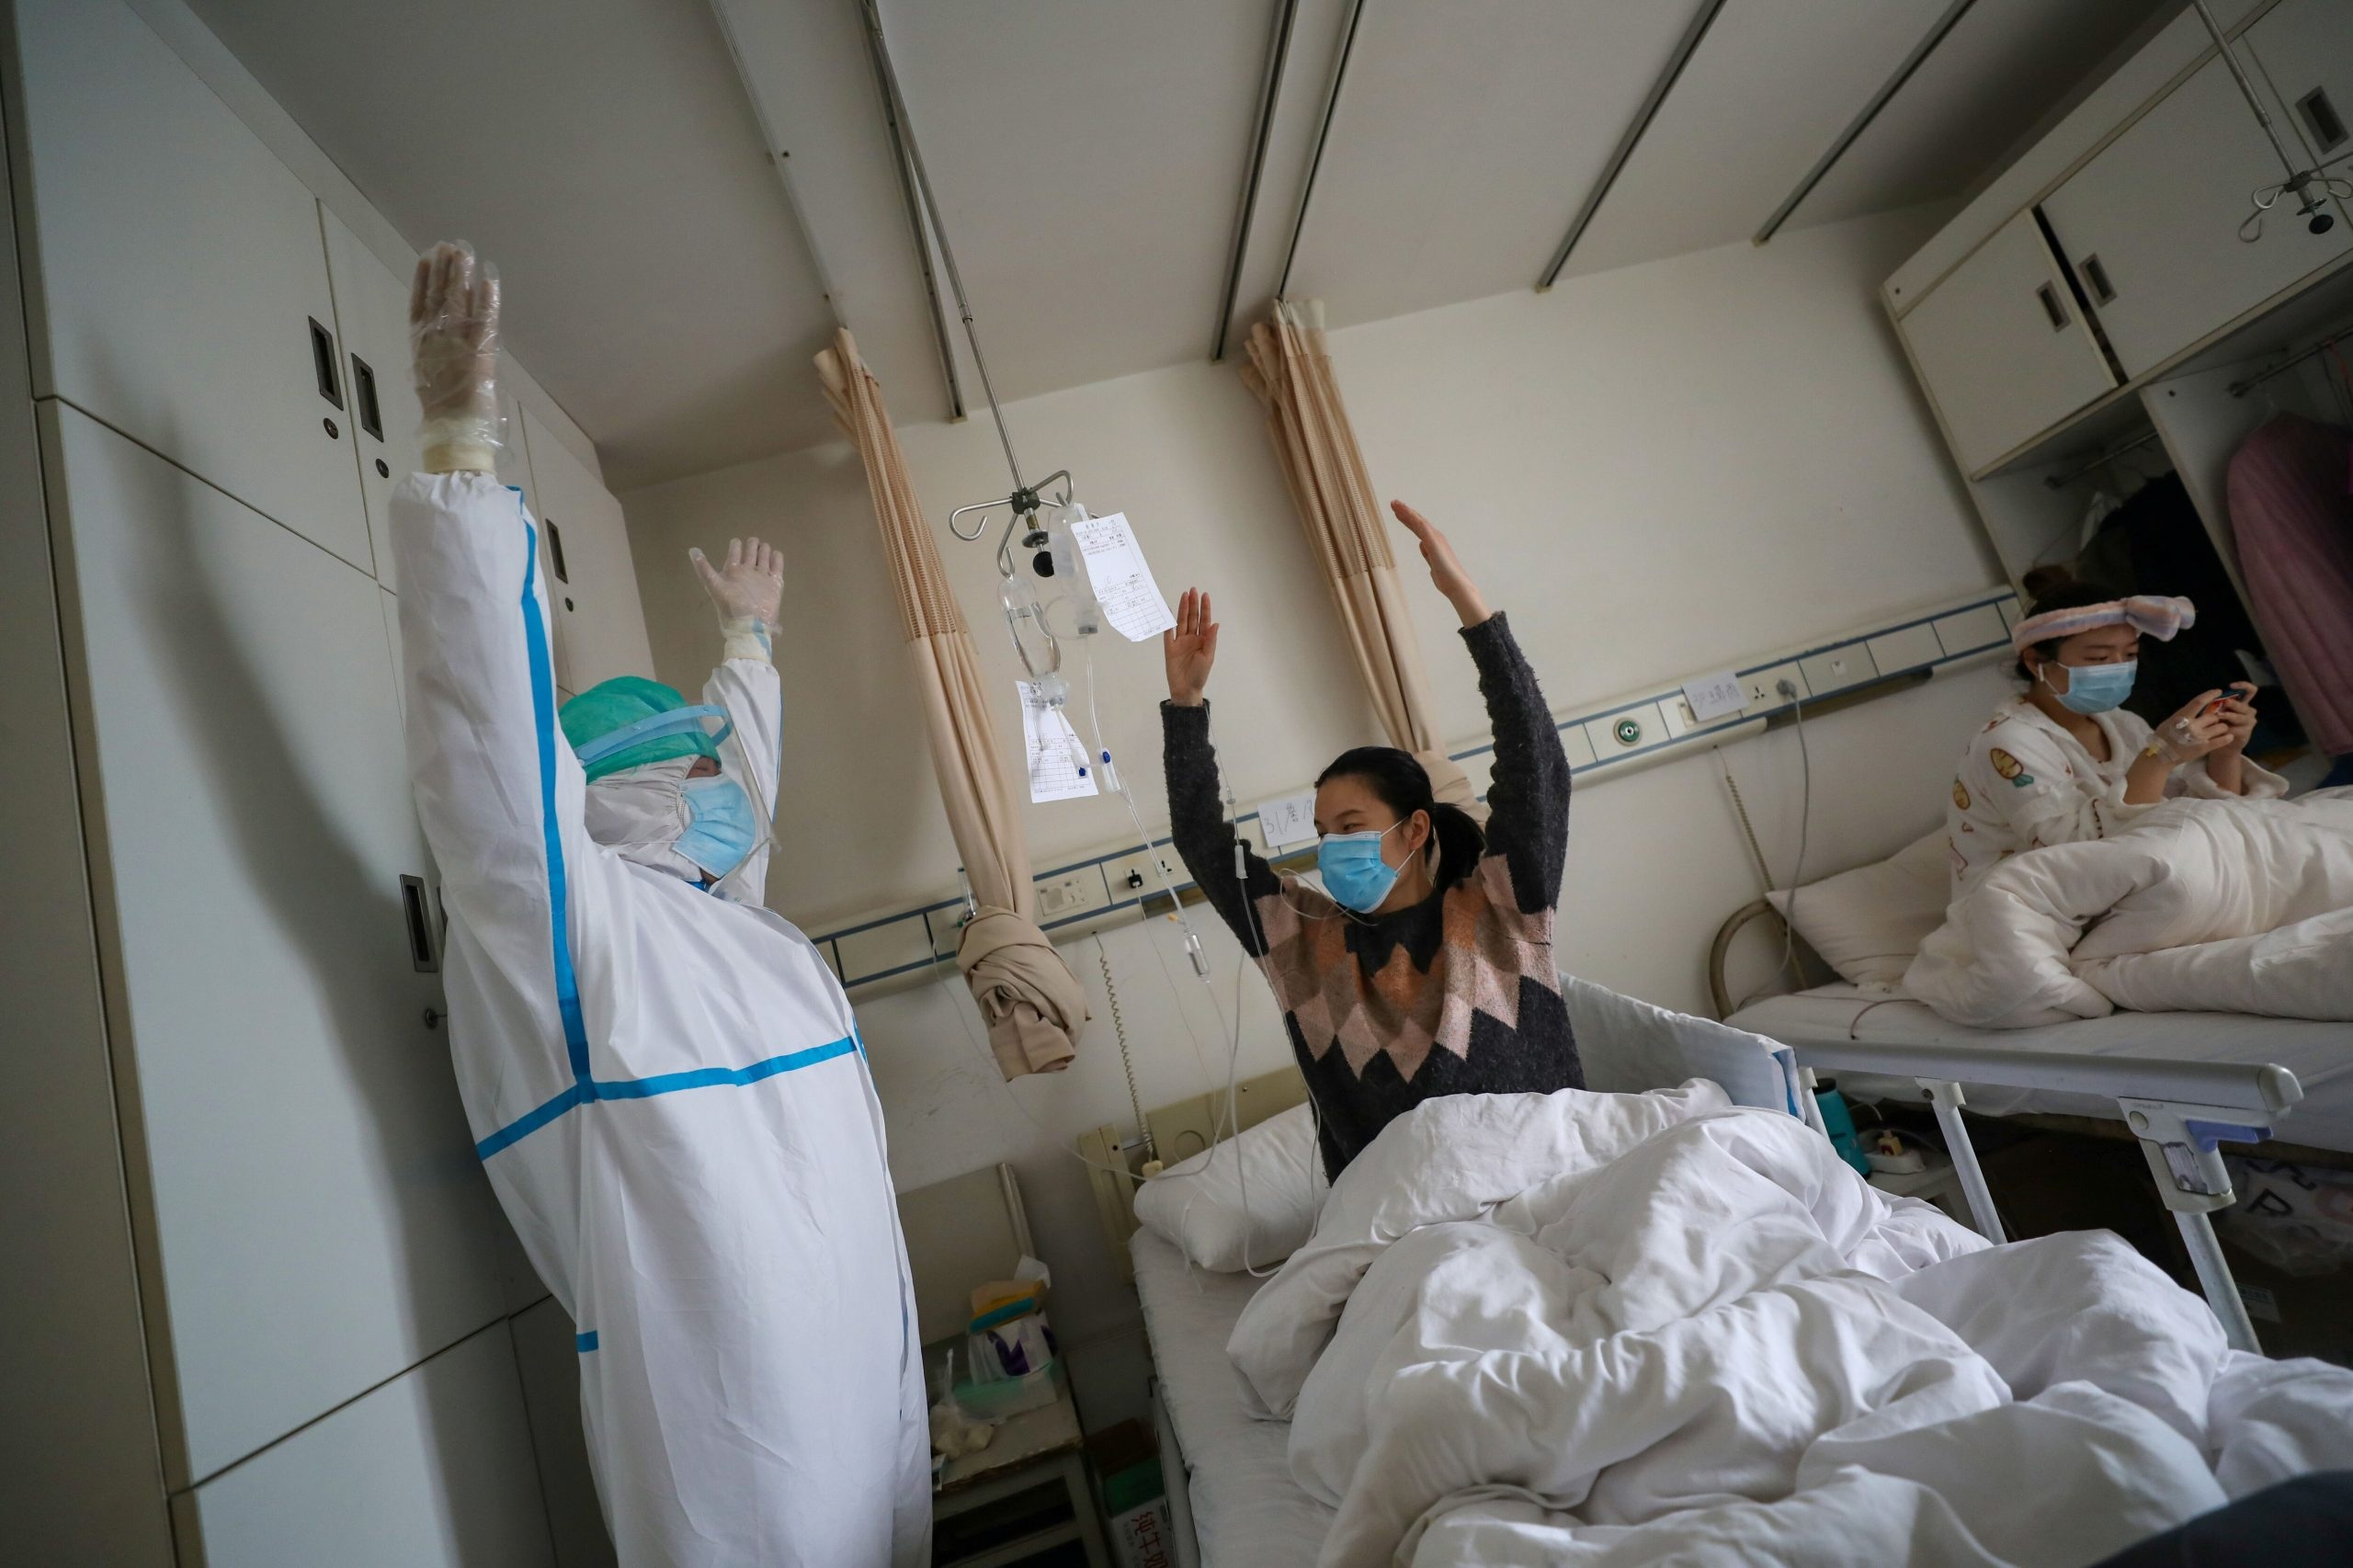 A medical worker in a protective suit shows a patient gestures of an exercise for rehabilitation at a ward of Wuhan Red Cross Hospital in Wuhan